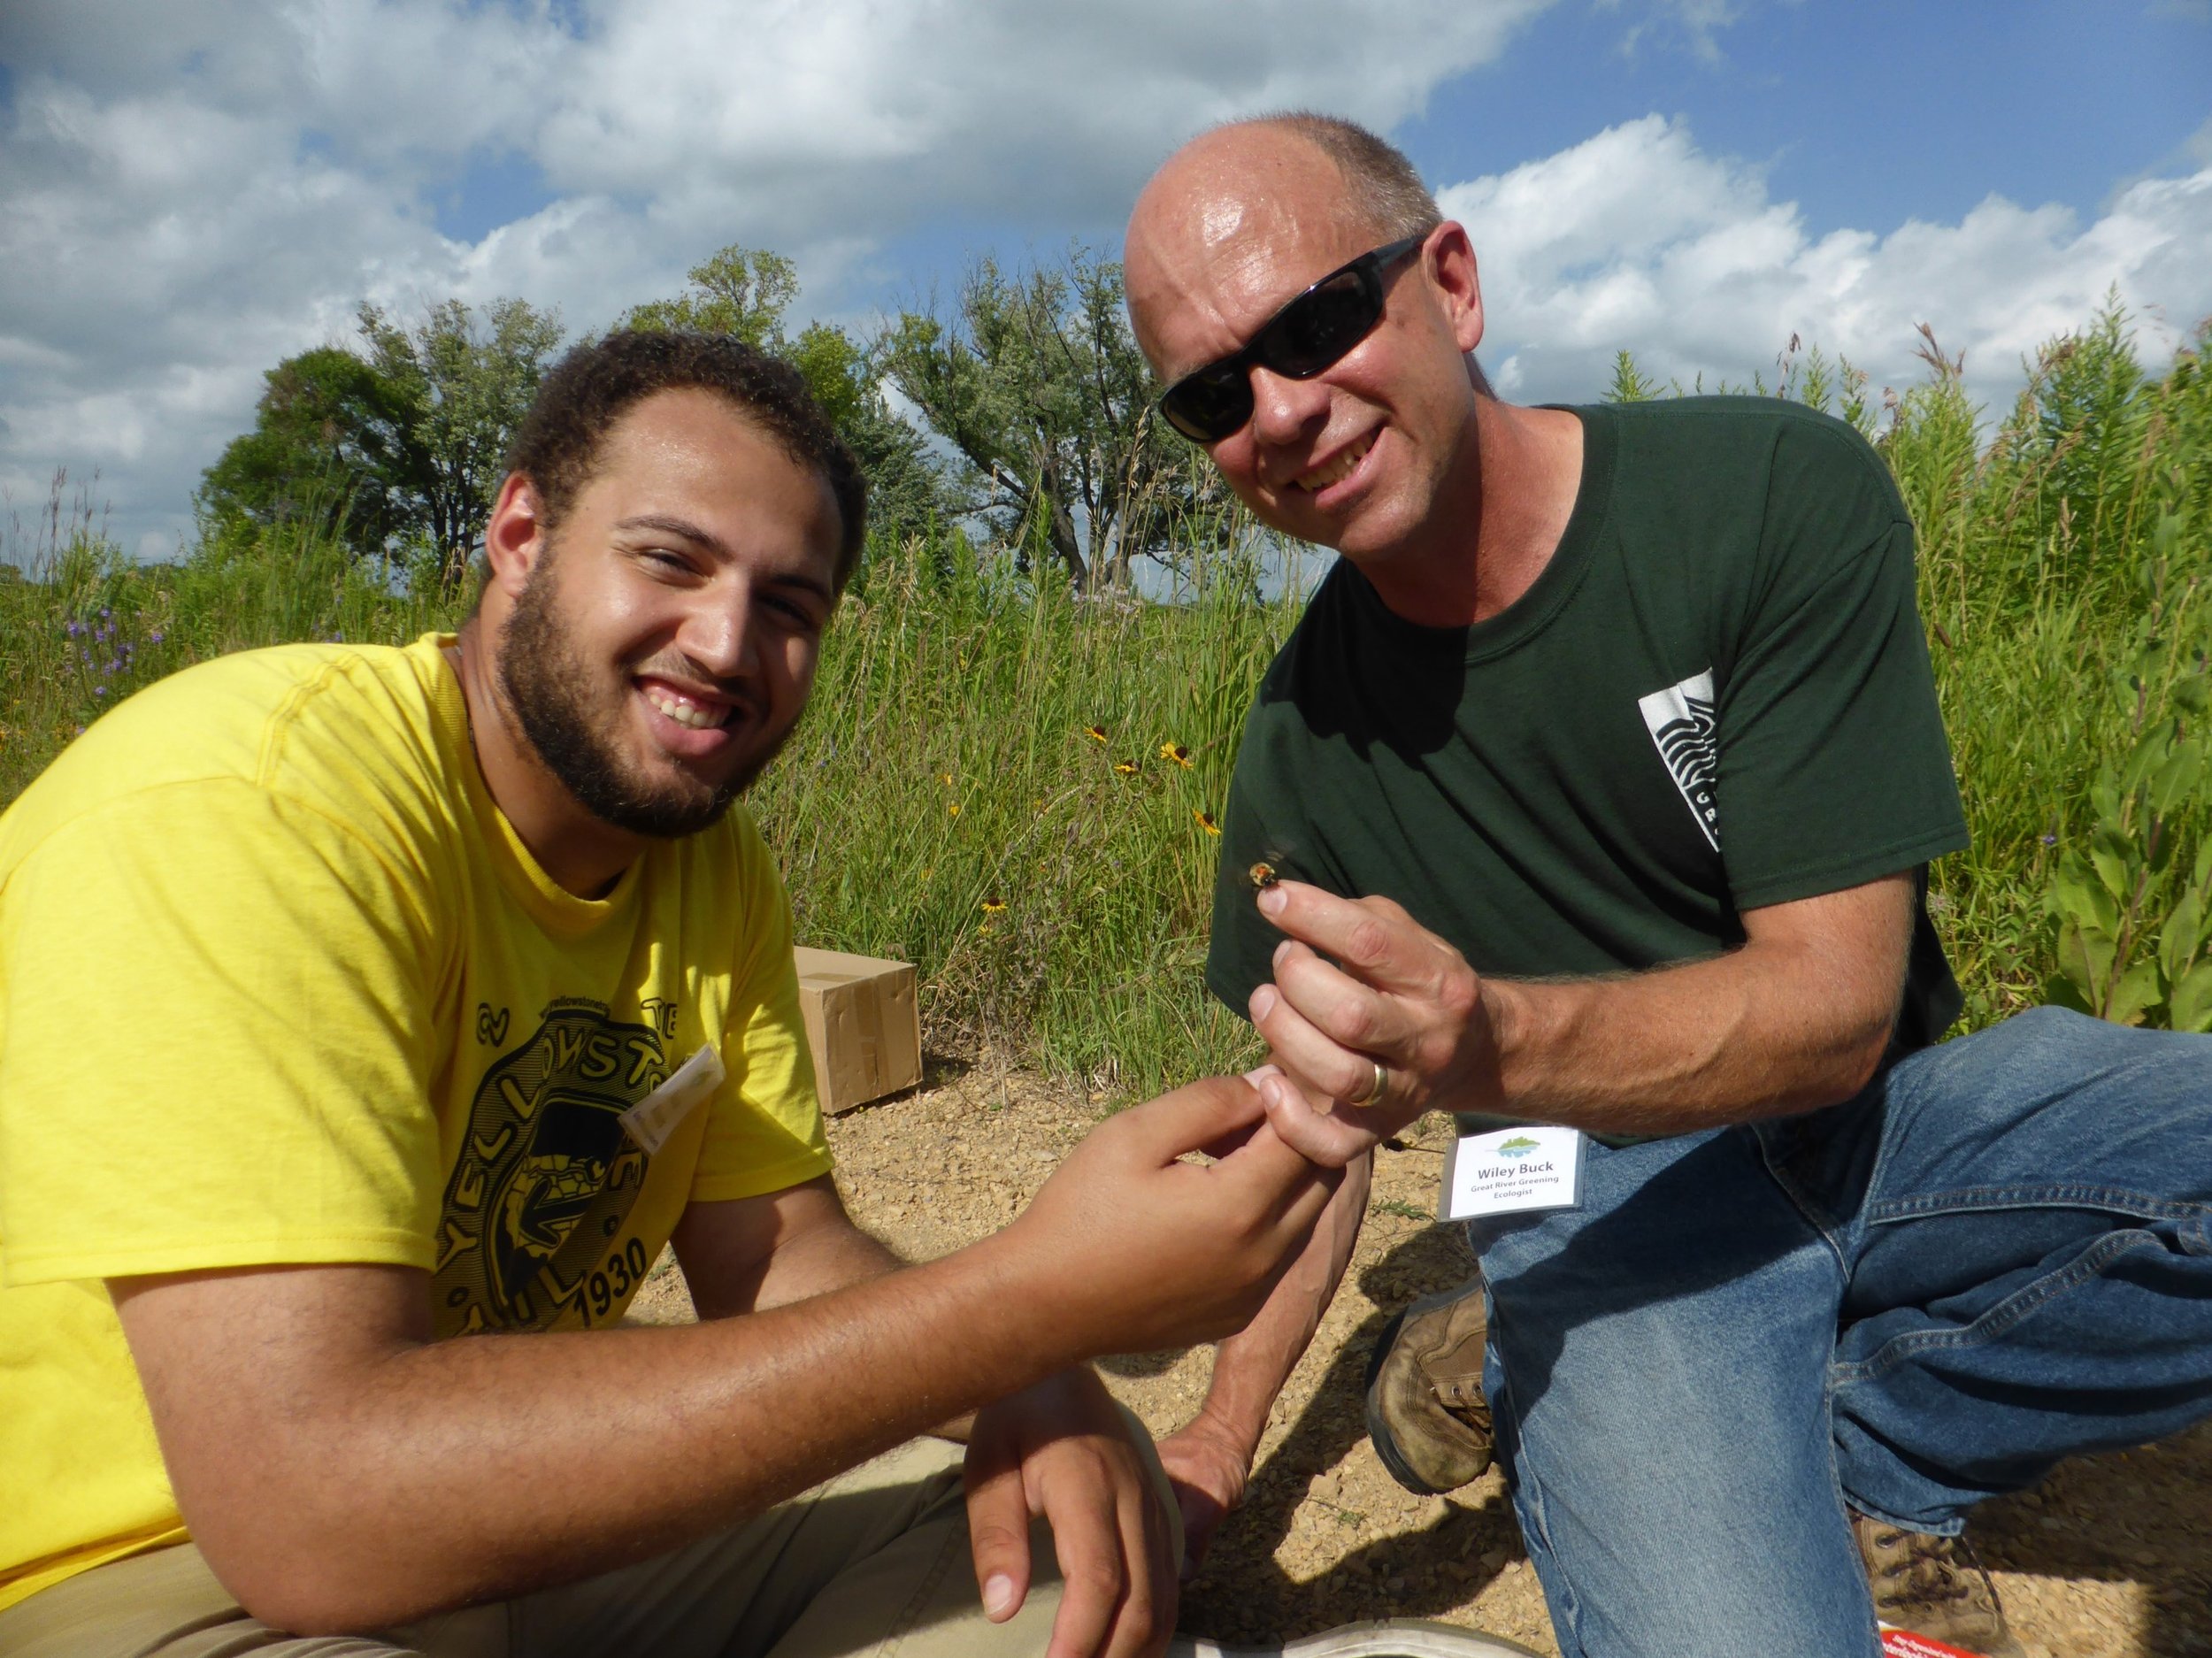 Daurius (left) and Wiley (right) participate in a bumble bee survey in 2014